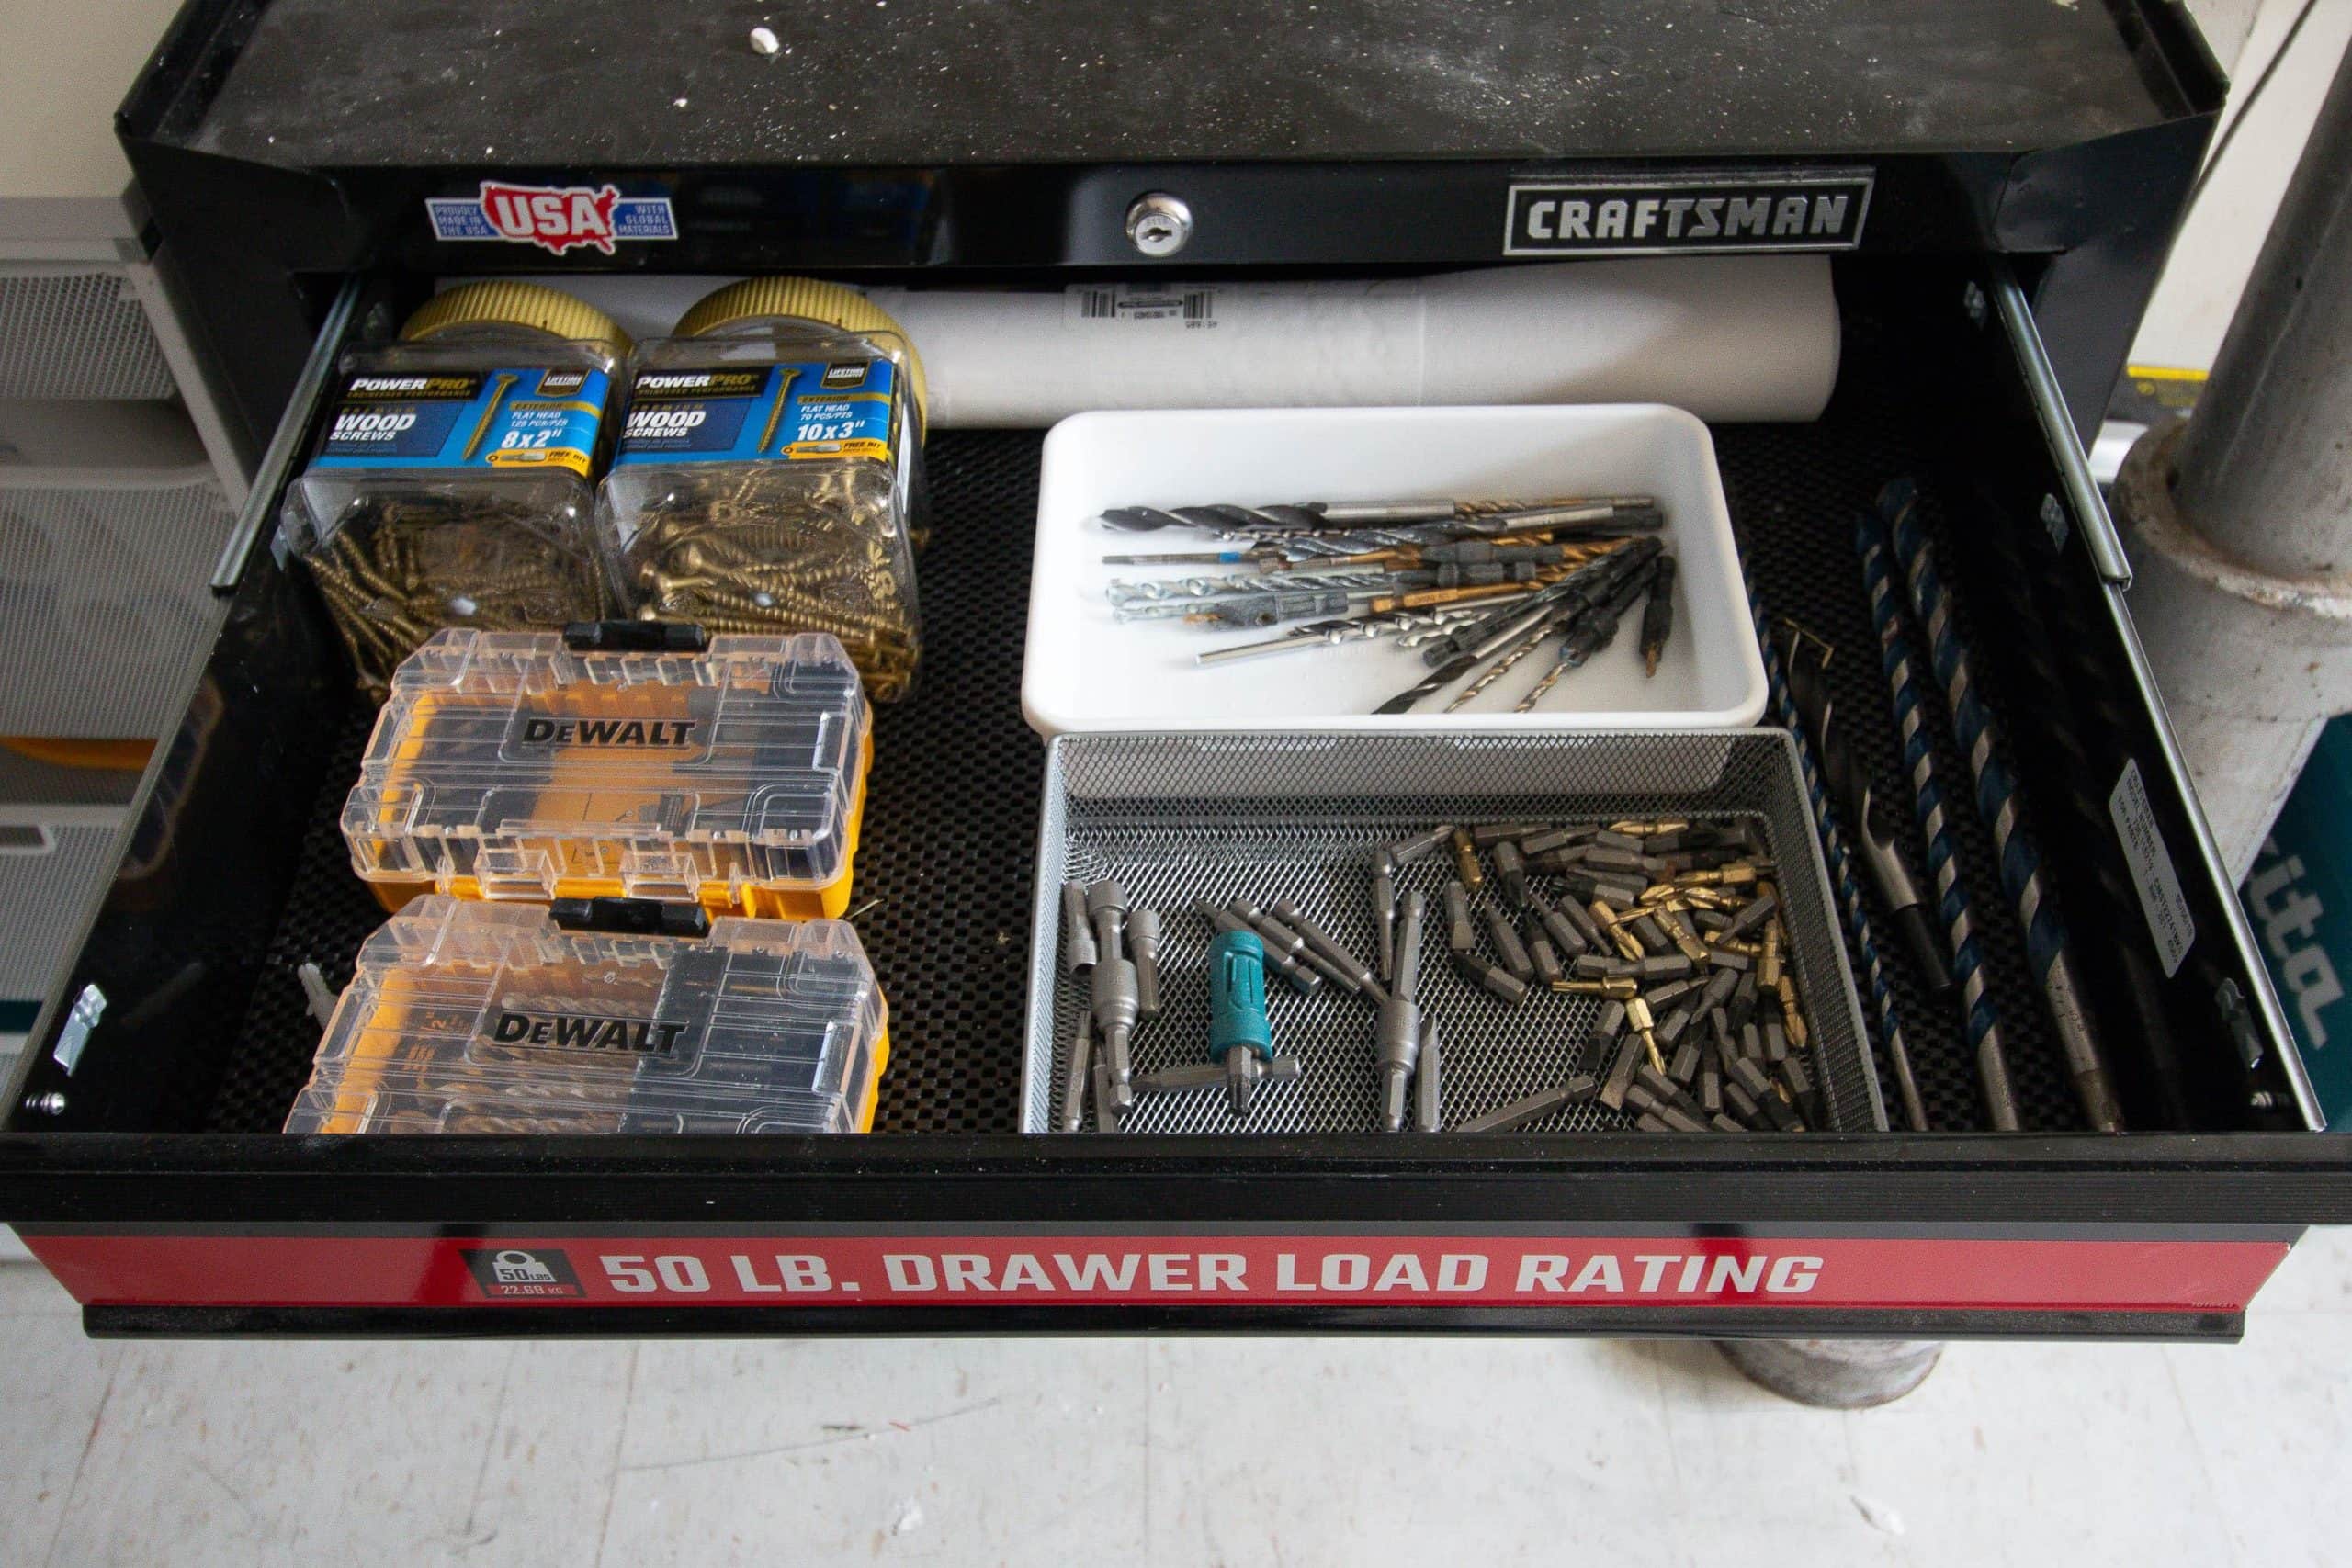 Tips to organize your tools